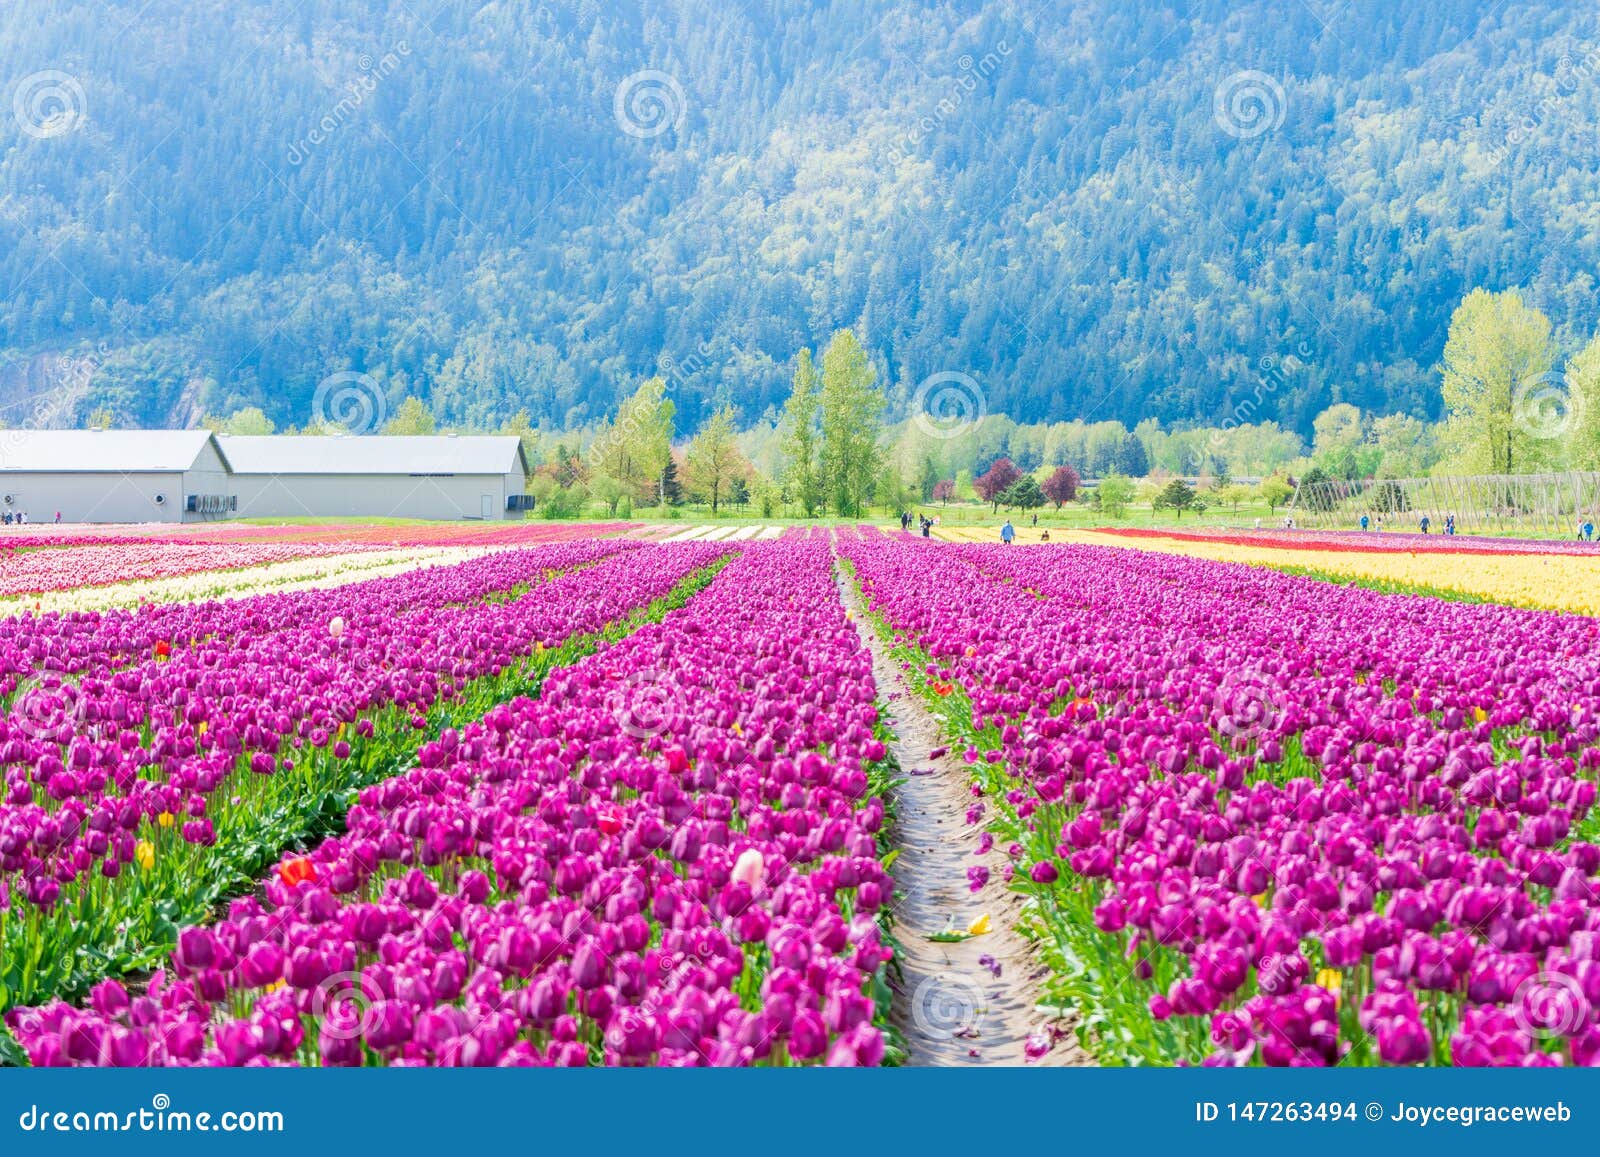 Real Tulip Farm Fields with Mountain the Background, Open To Tourists at  the Chilliwack Tulip Festival in Canada, with Real Stock Photo - Image of  festival, botany: 147263494